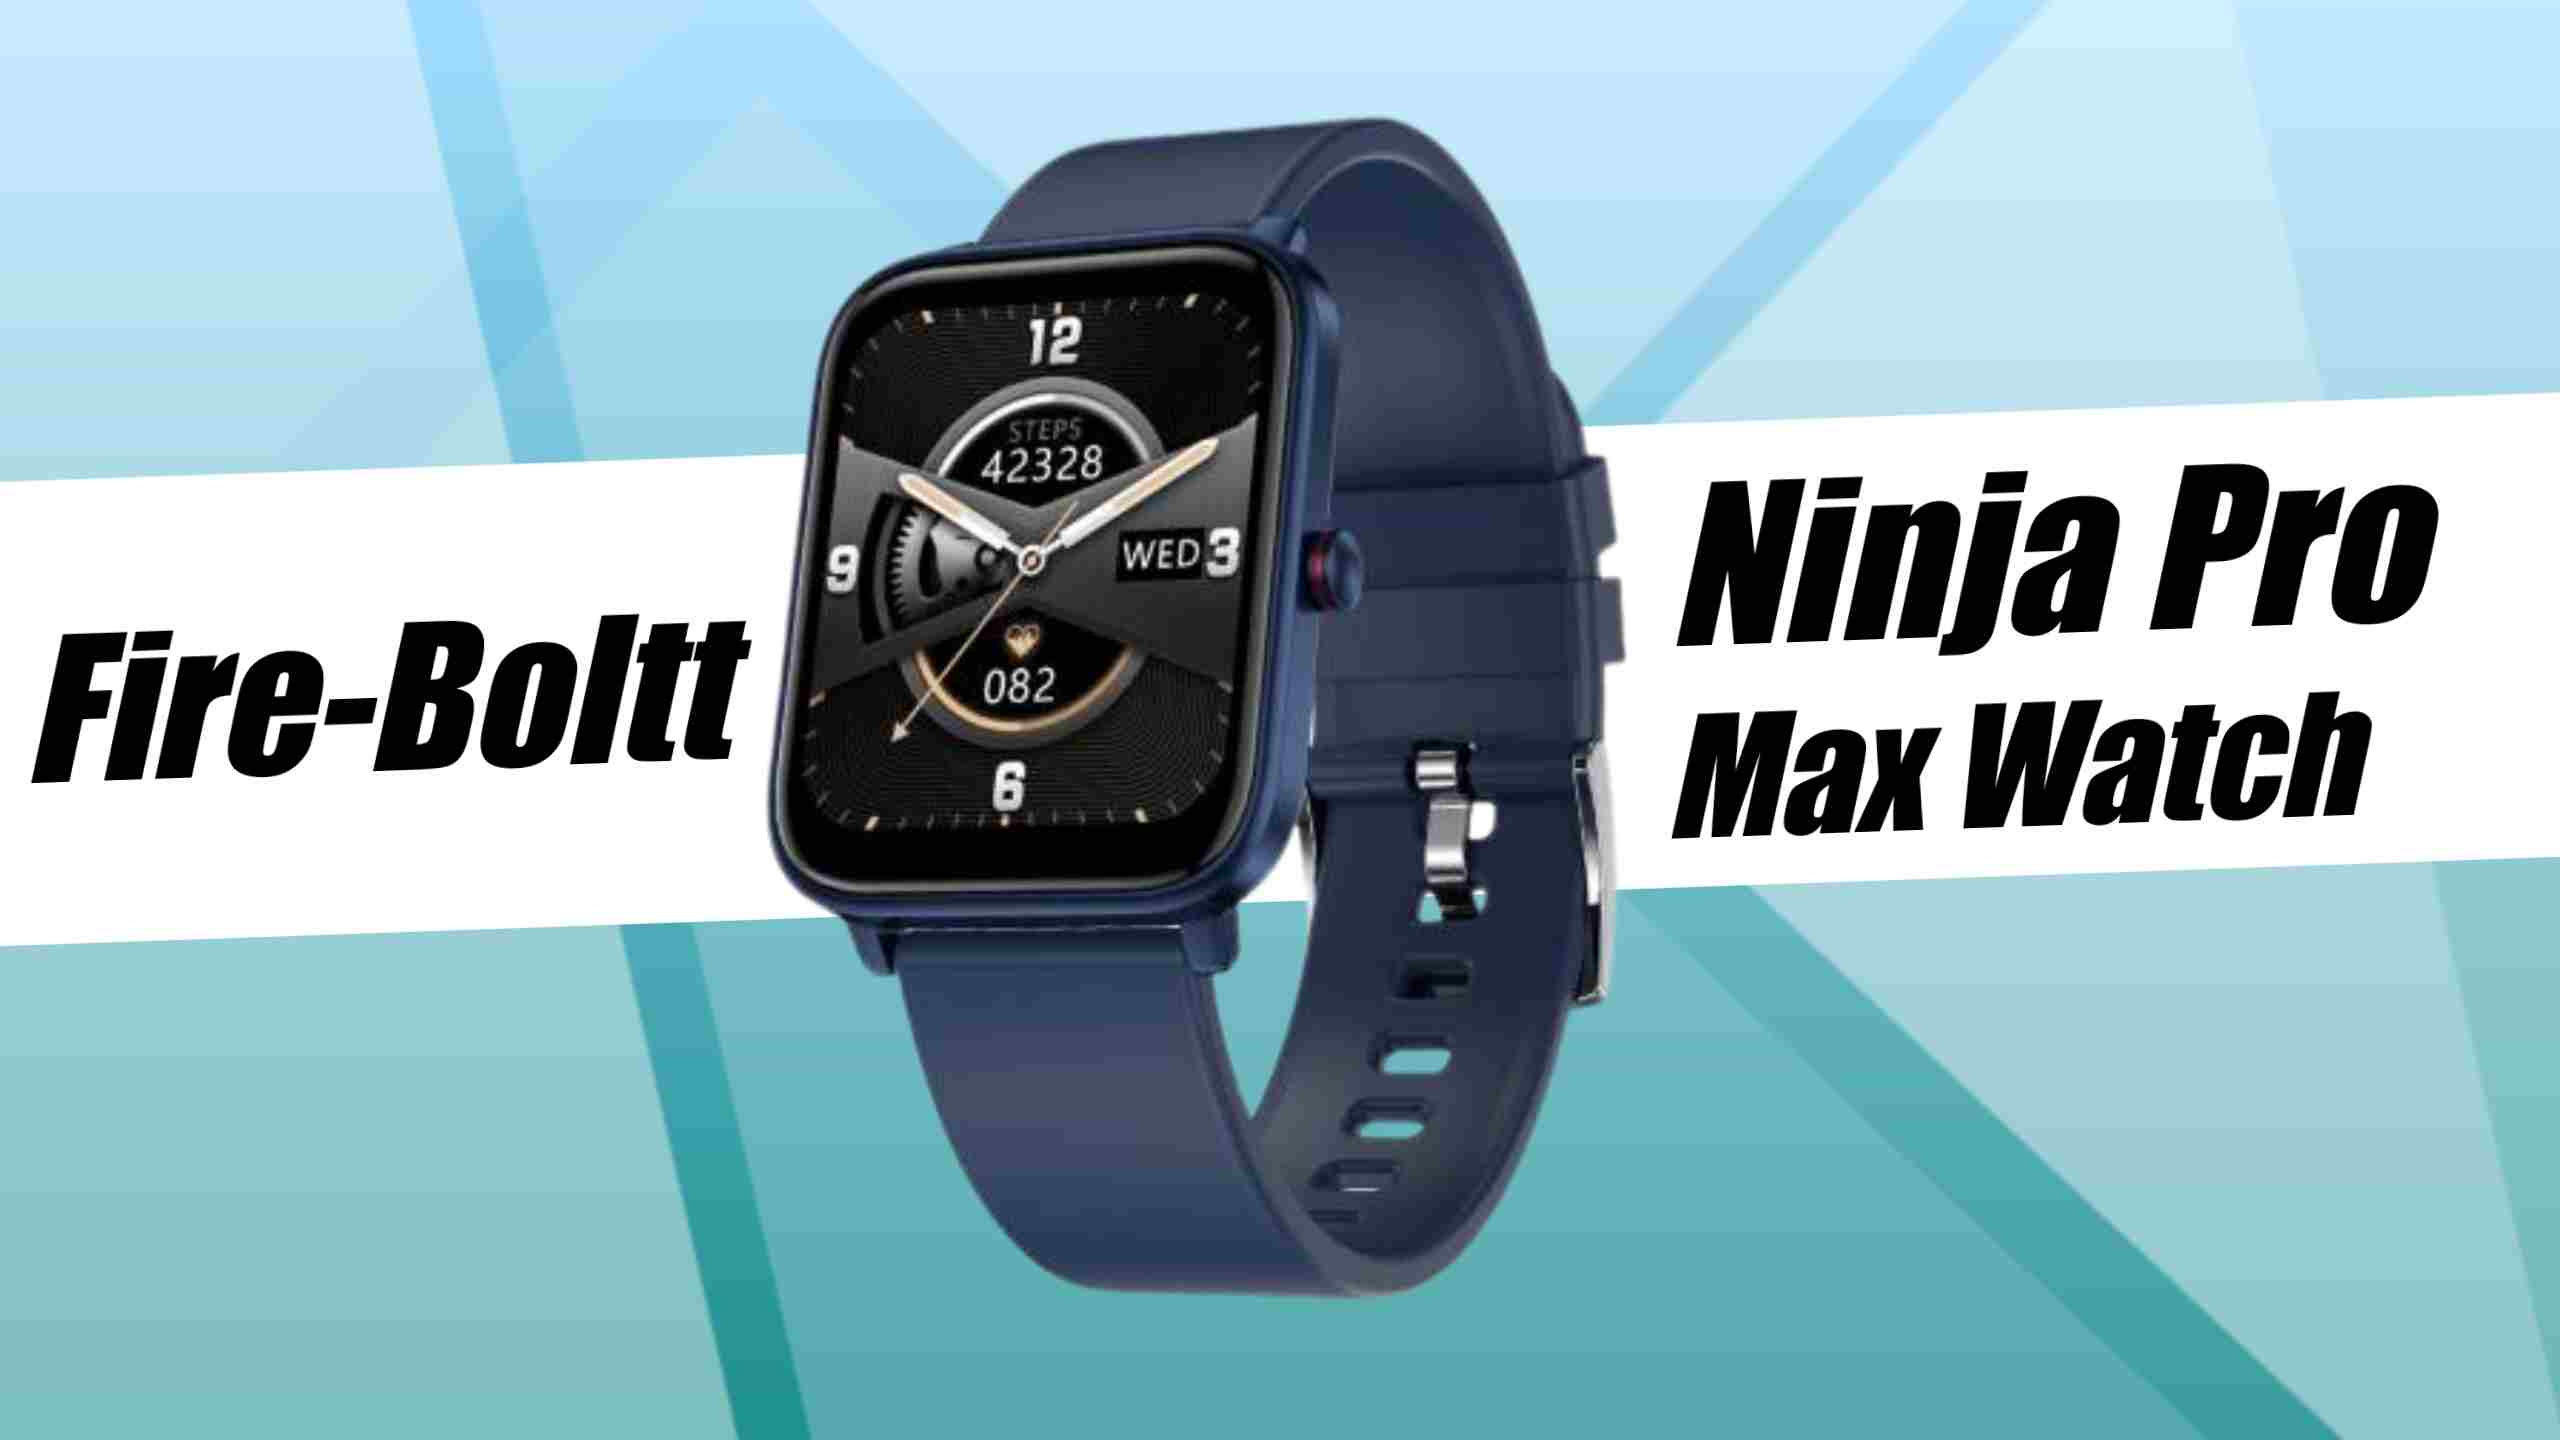 Fire-Boltt Ninja Pro Max smartwatch with 30 days battery life launched in India